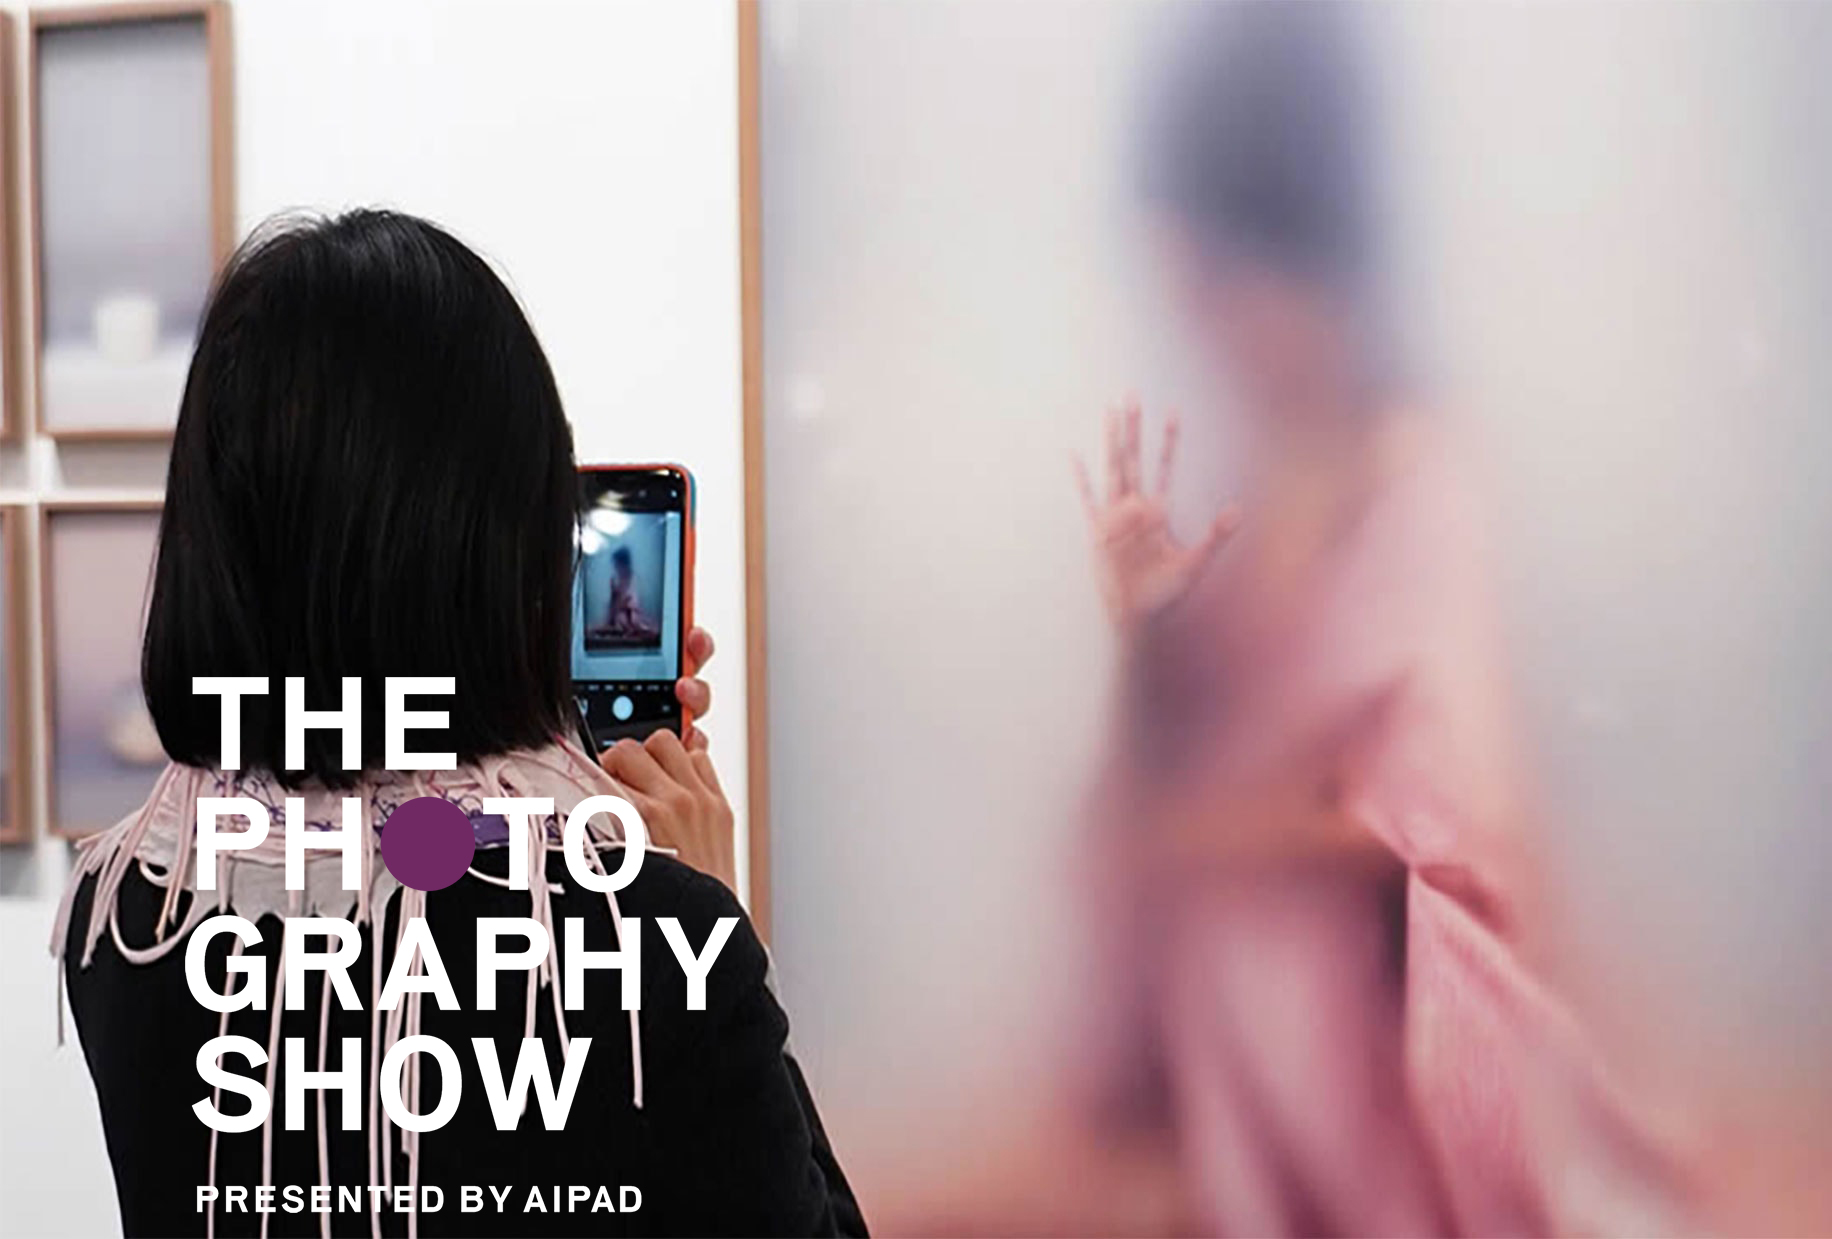 THE PHOTOGRAPHY SHOW